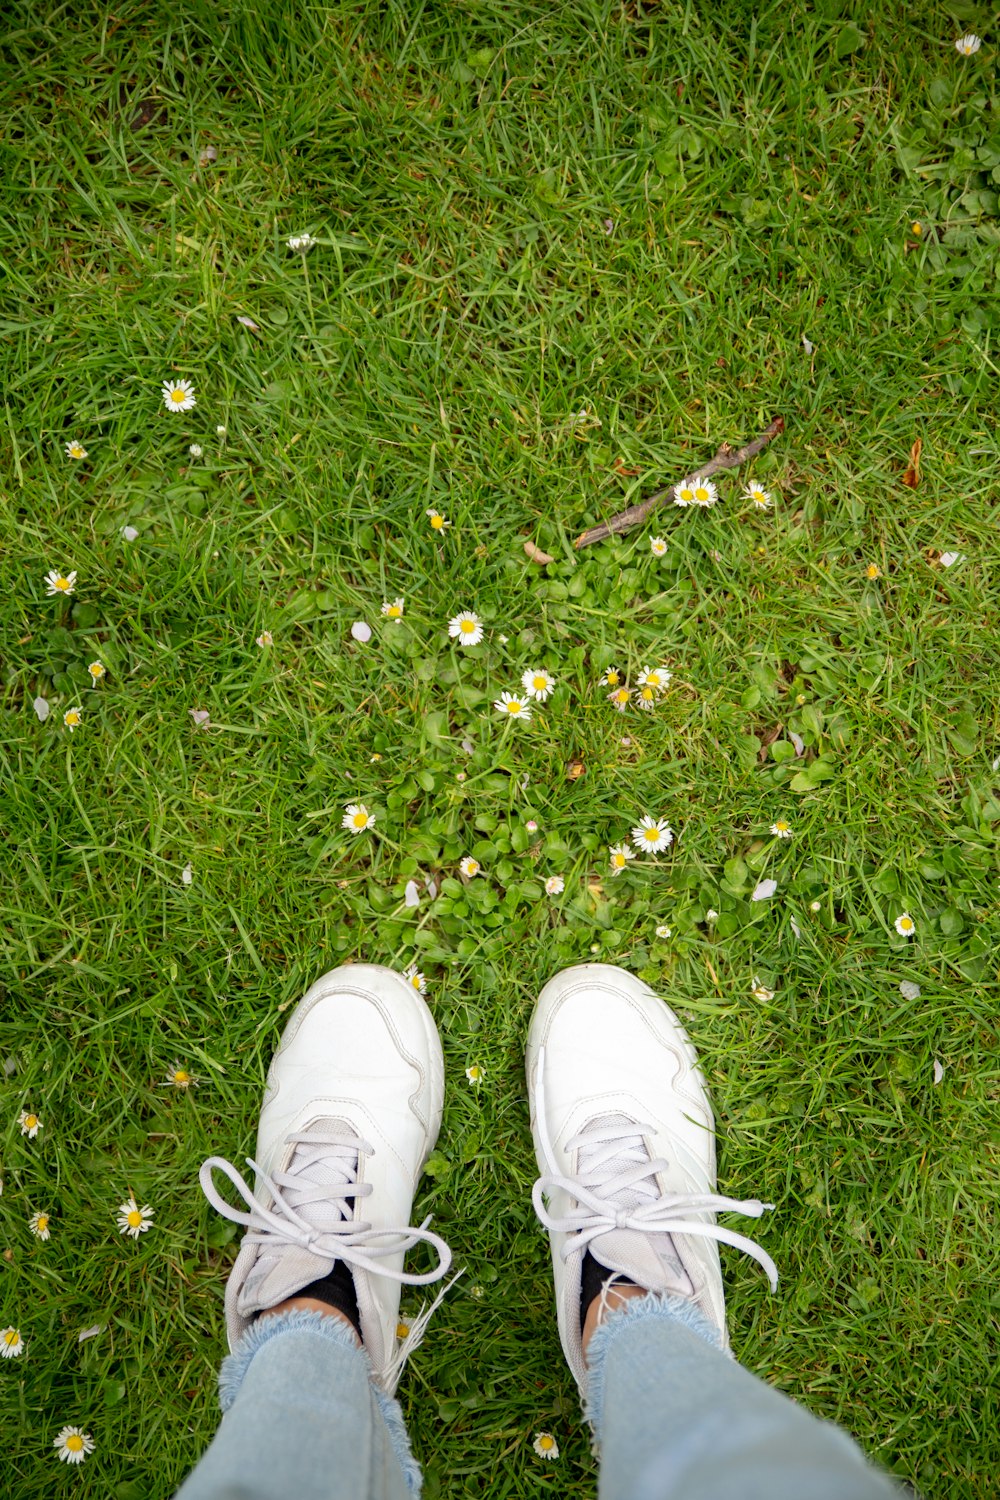 unknown person stepping on grass grass